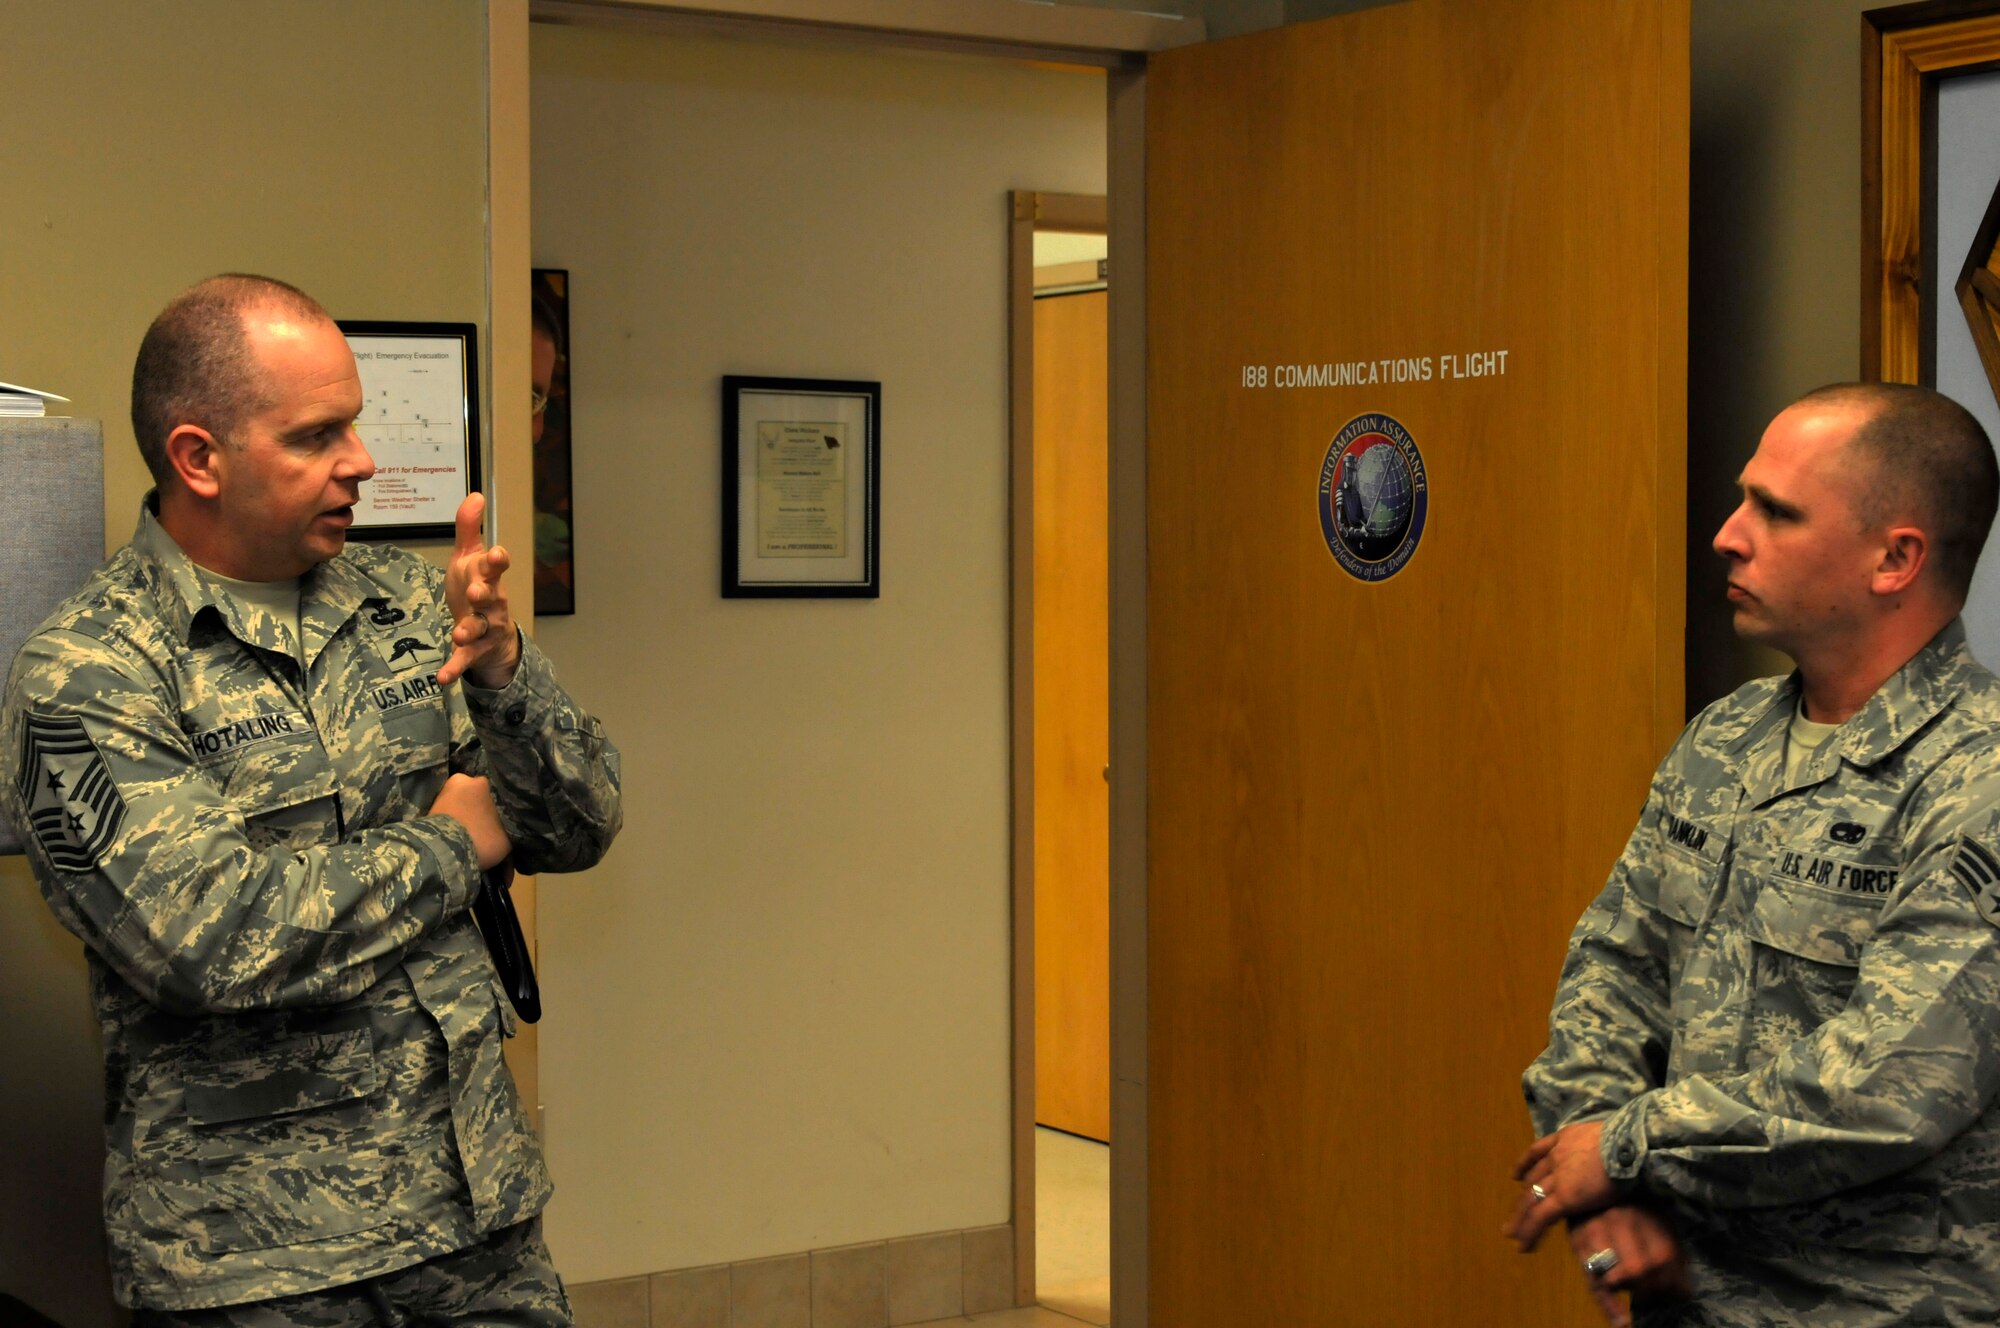 Air National Guard Command Chief Master Sgt. James W. Hotaling speaks with Senior Airman Christopher Franklin at Ebbing Air National Guard Base, Fort Smith, Ark., April 5, 2014. Hotaling visited with many different groups of Airmen during his time at the wing. He also met with wing leadership before touring the unit’s facilities.  (U.S. Air National Guard photo by Airman 1st Class Cody Martin/Released)